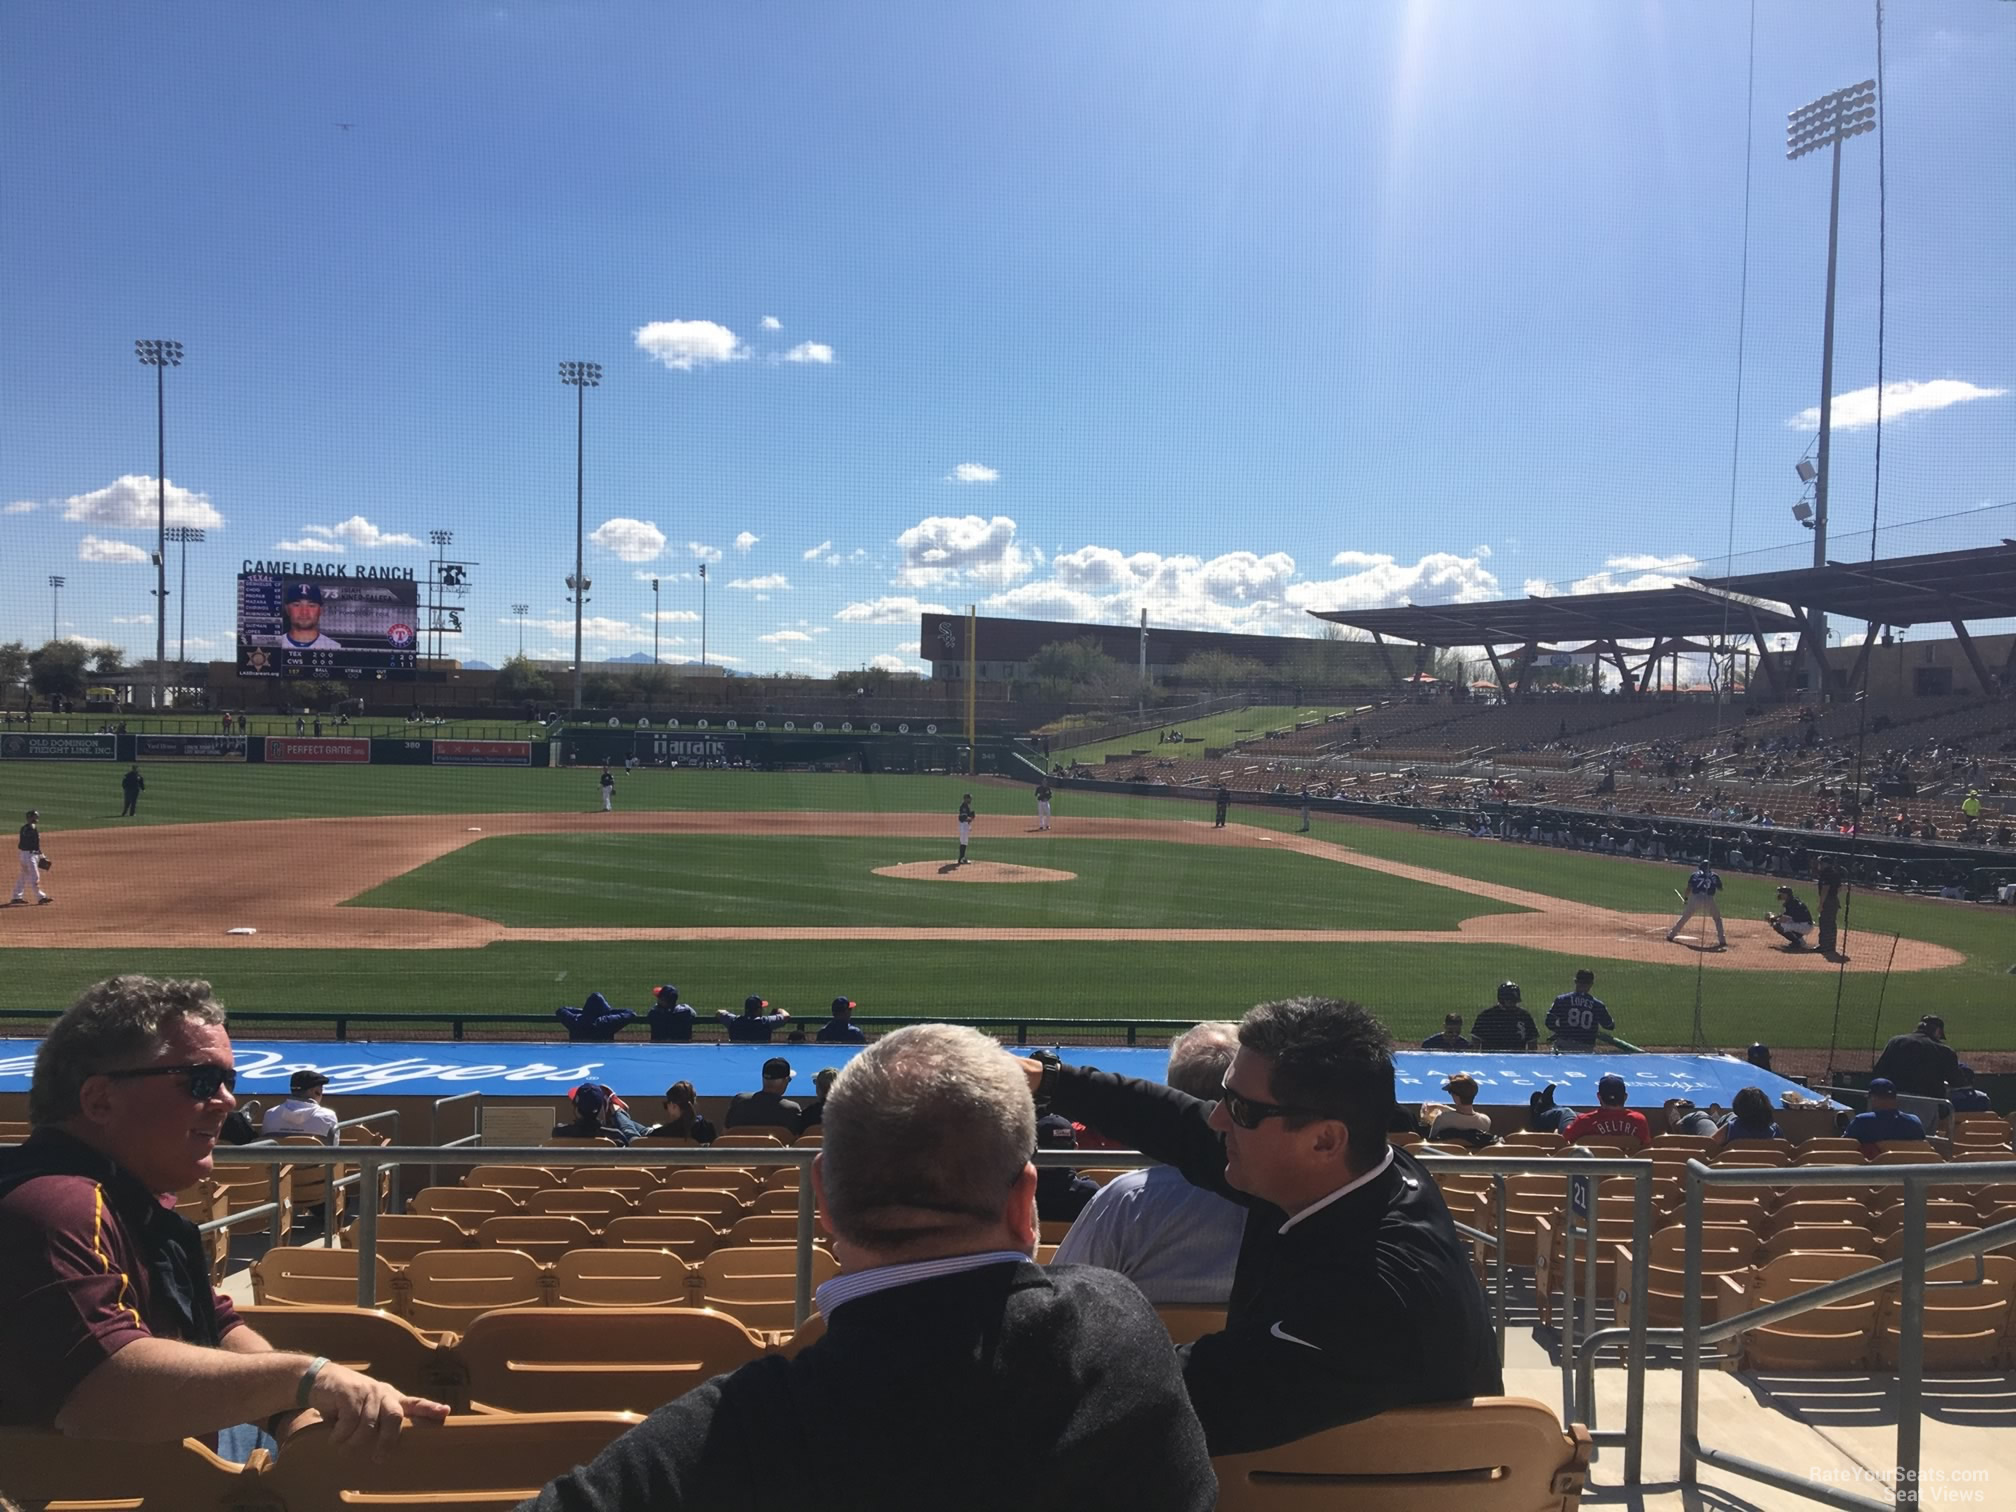 section 121, row 5 seat view  - camelback ranch